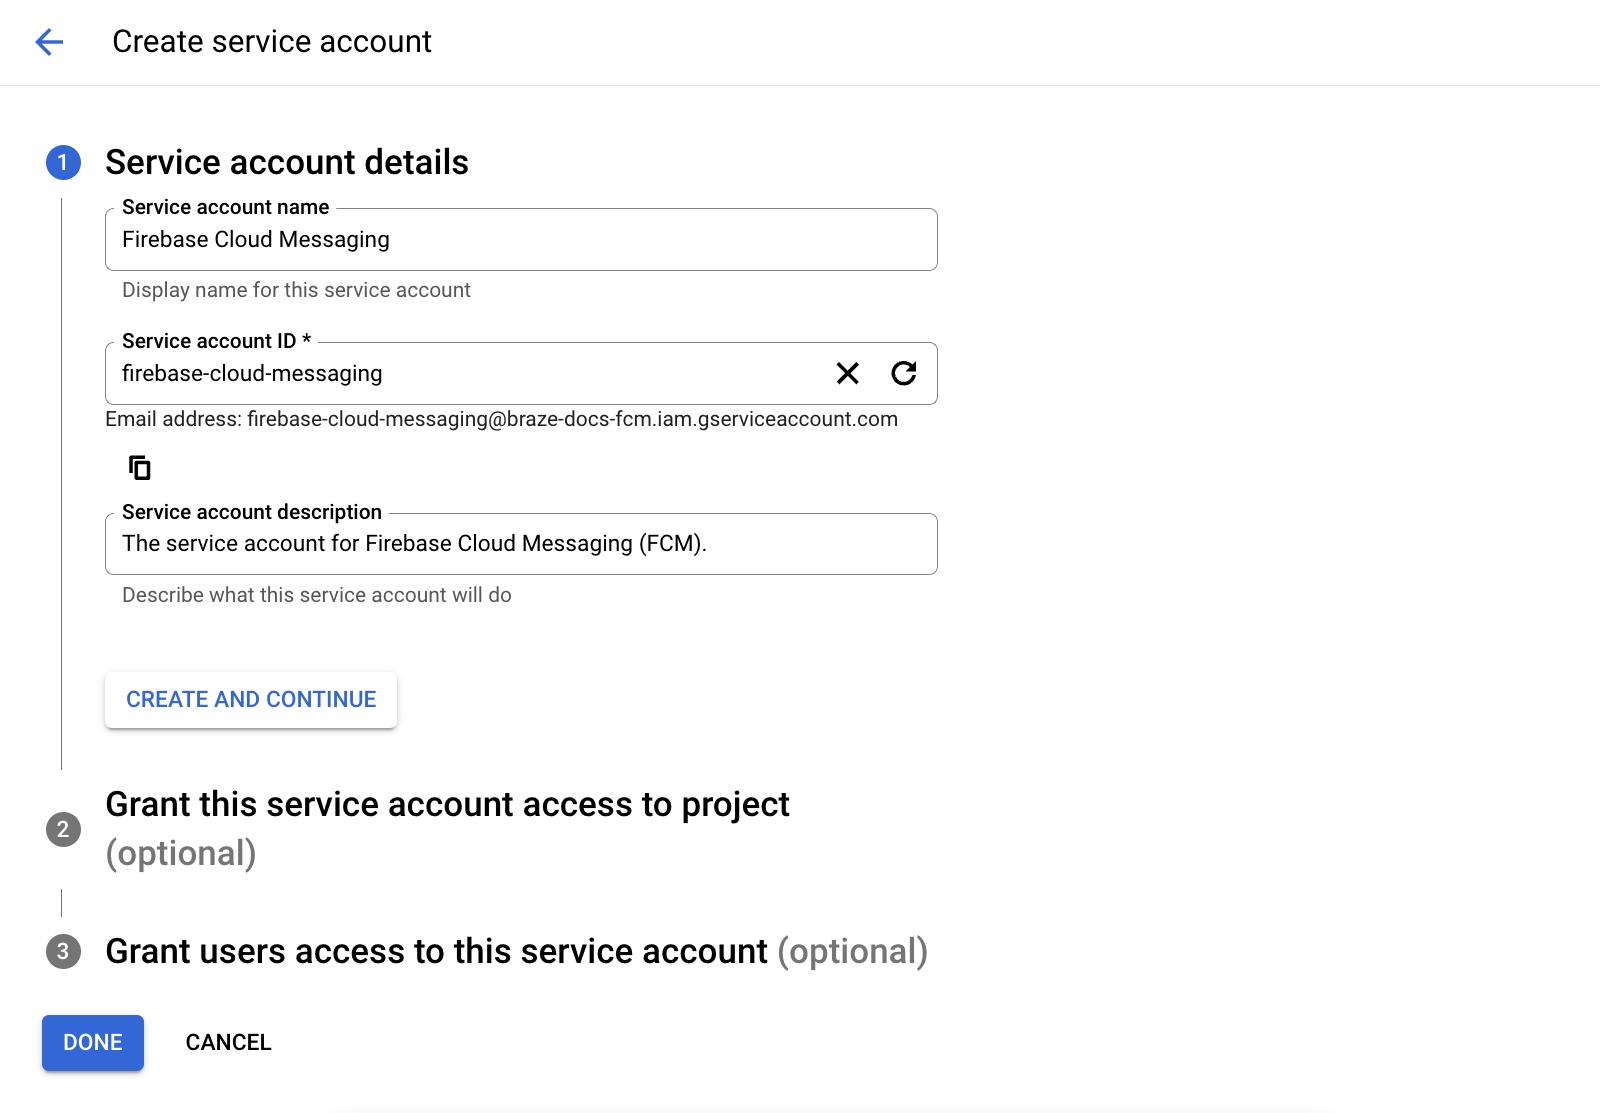 The form for "Service account details."